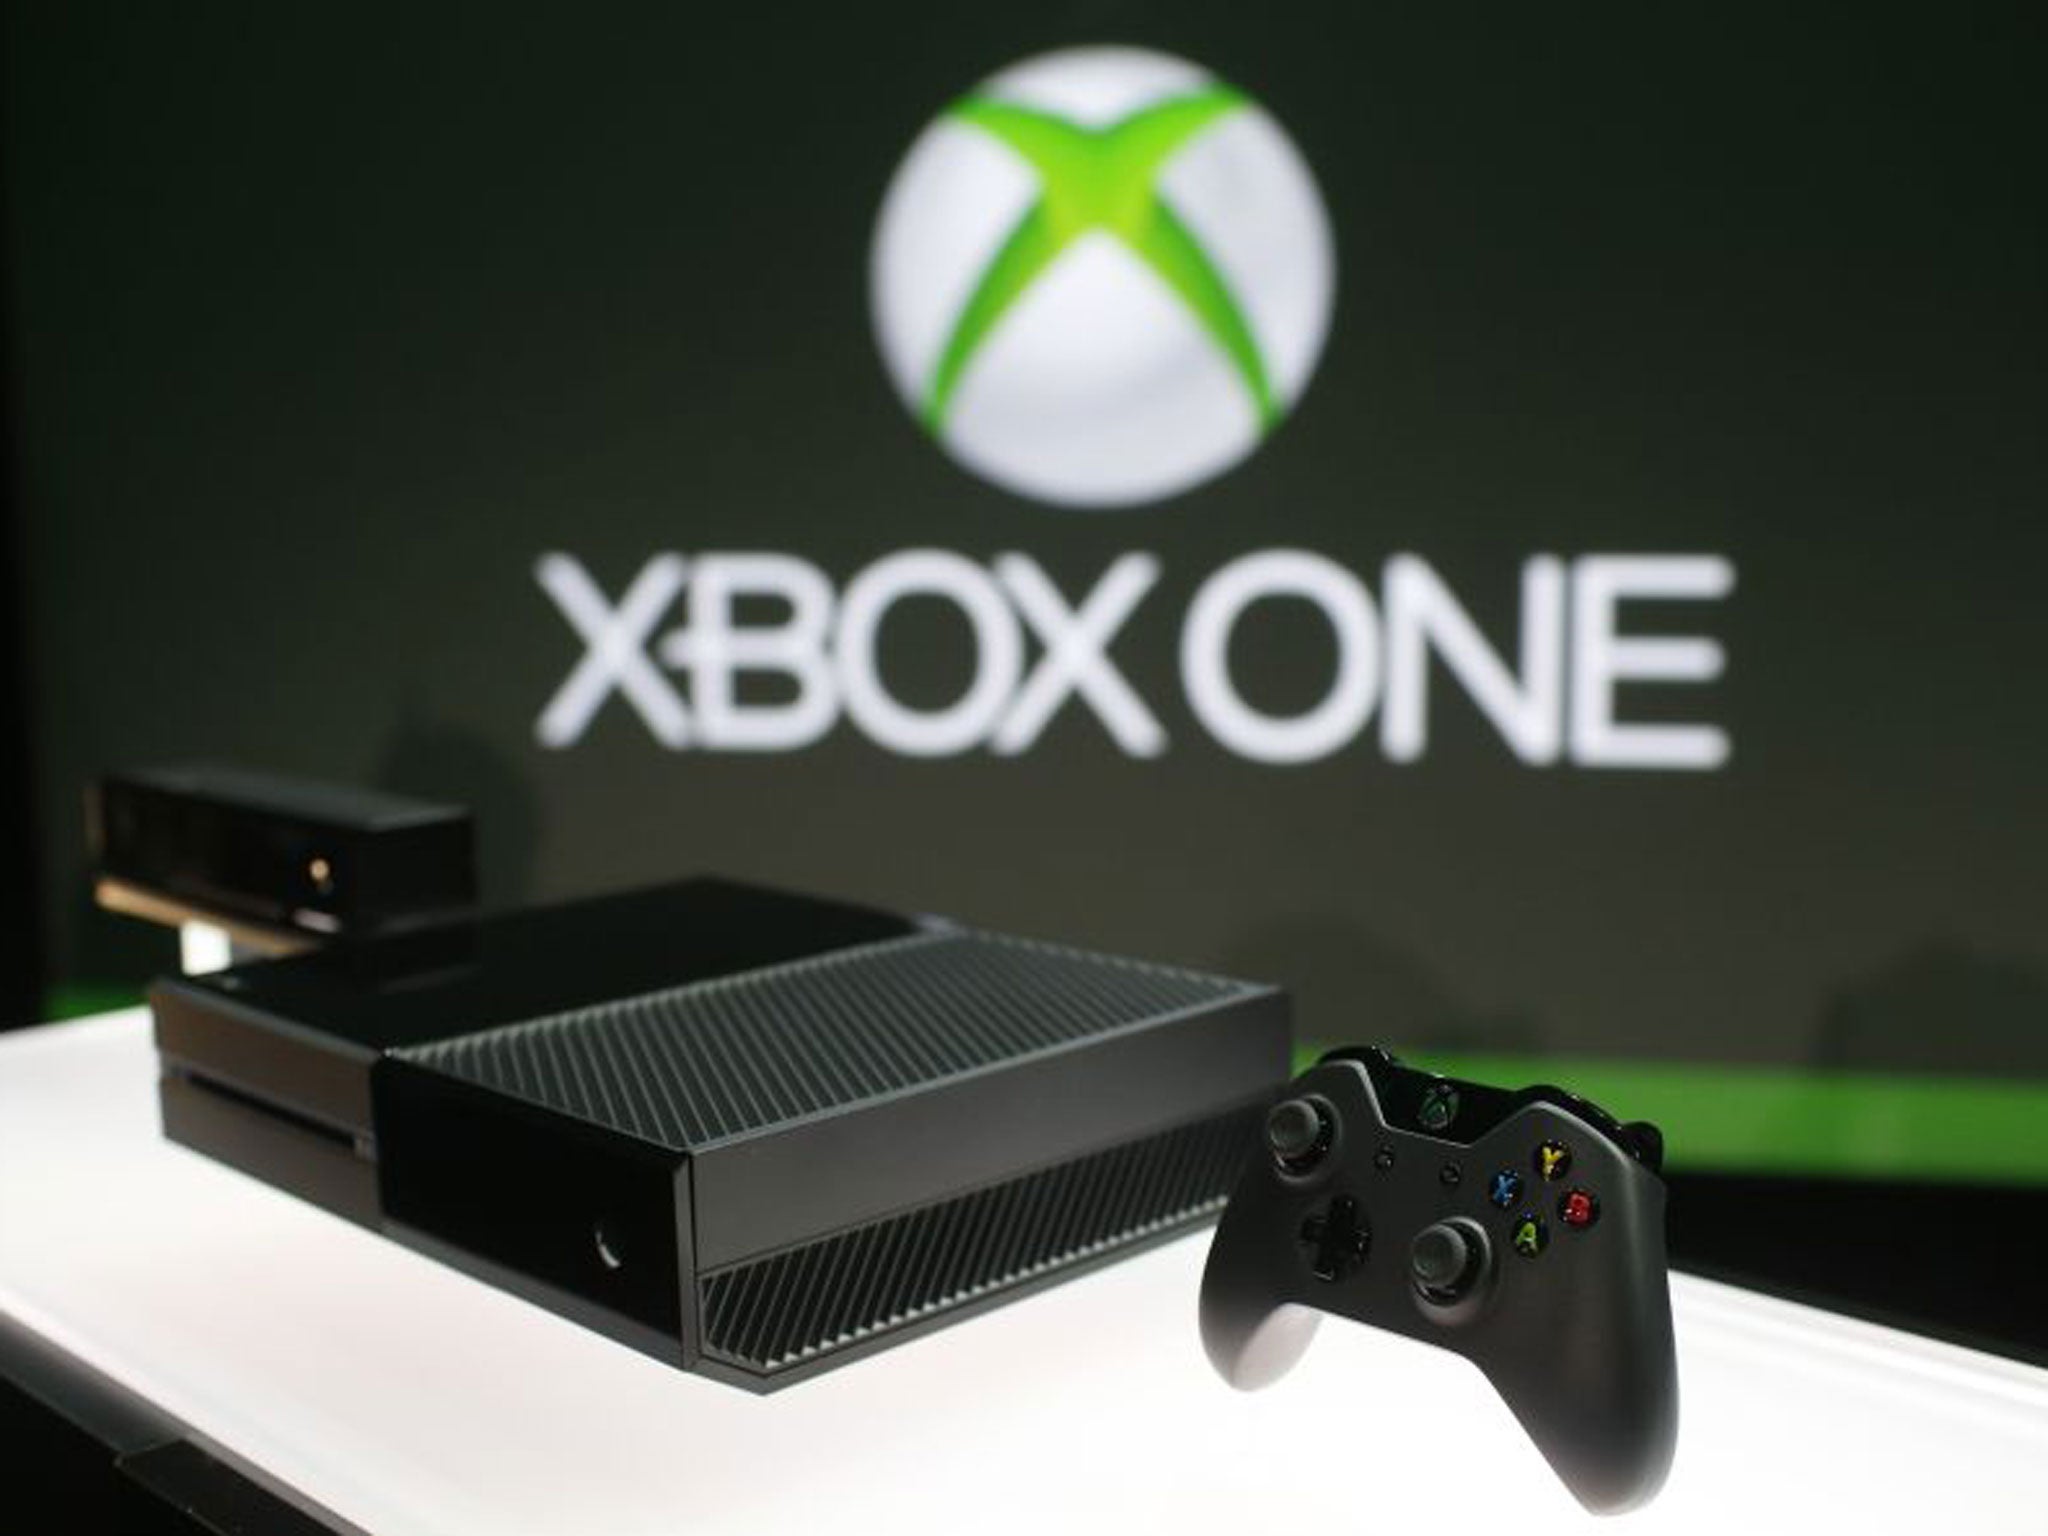 The Xbox One is less powerful than the PS4, but the actual differences will be minimal.